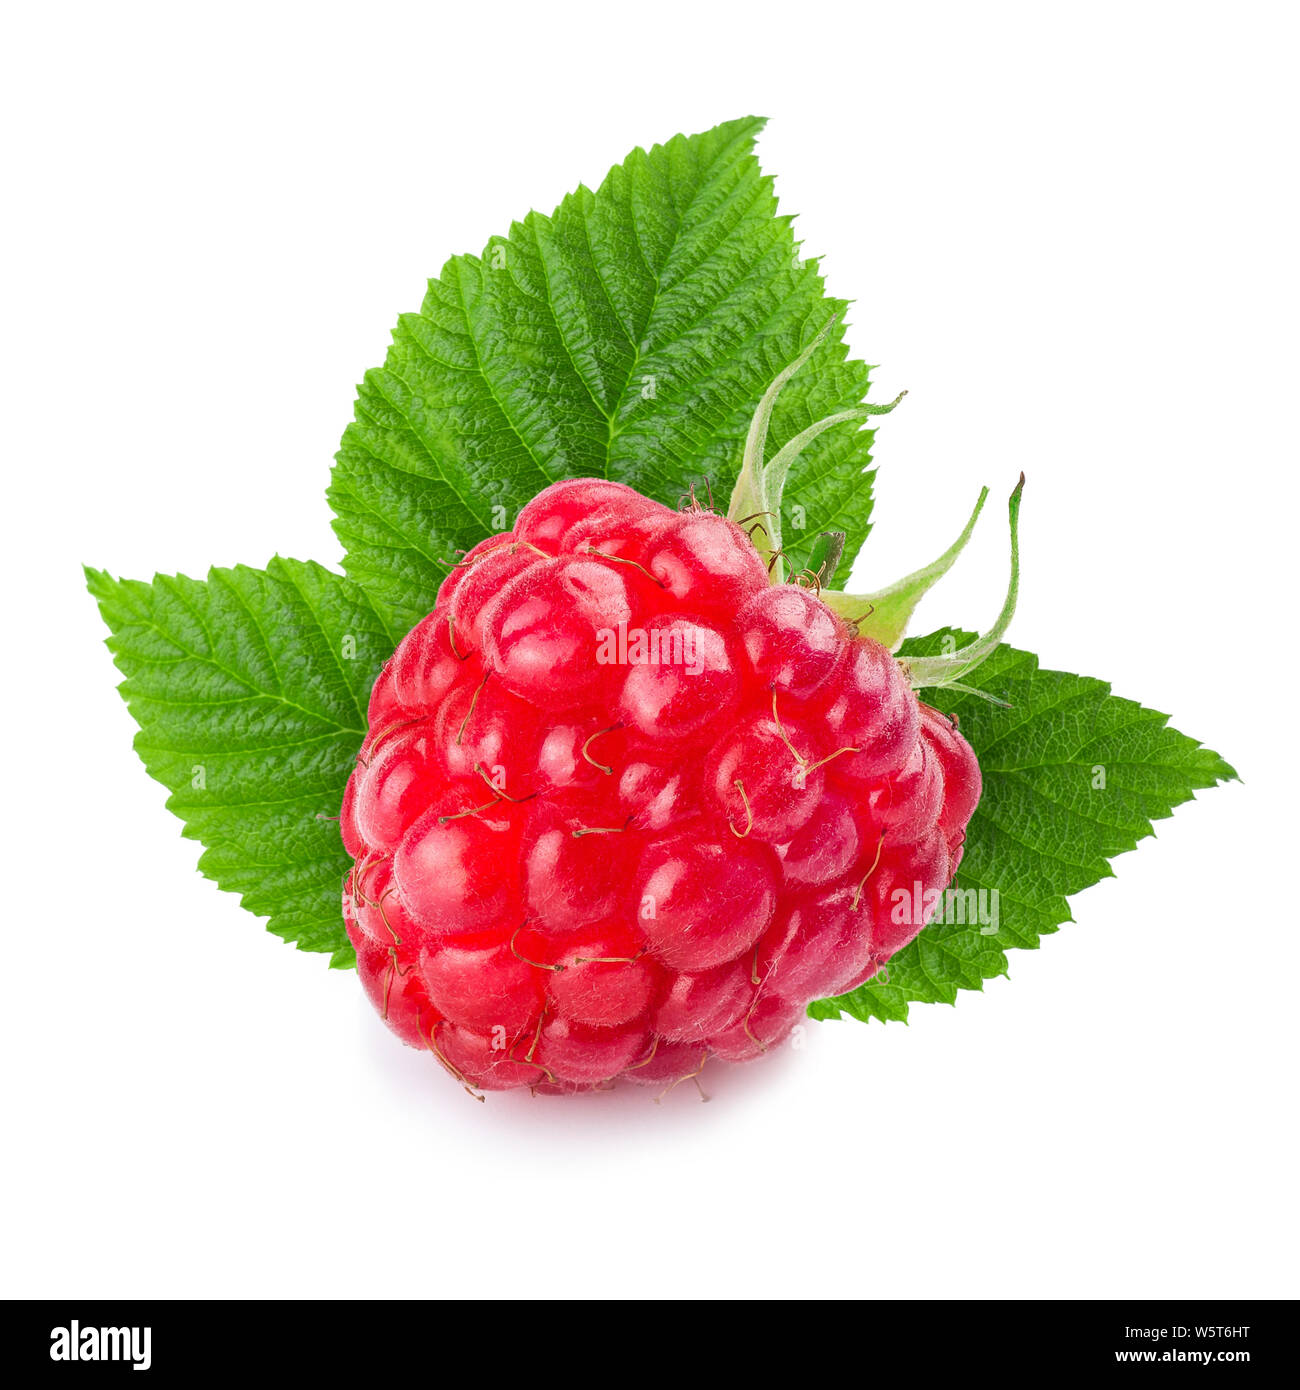 Raspberry isolated on white Banque D'Images